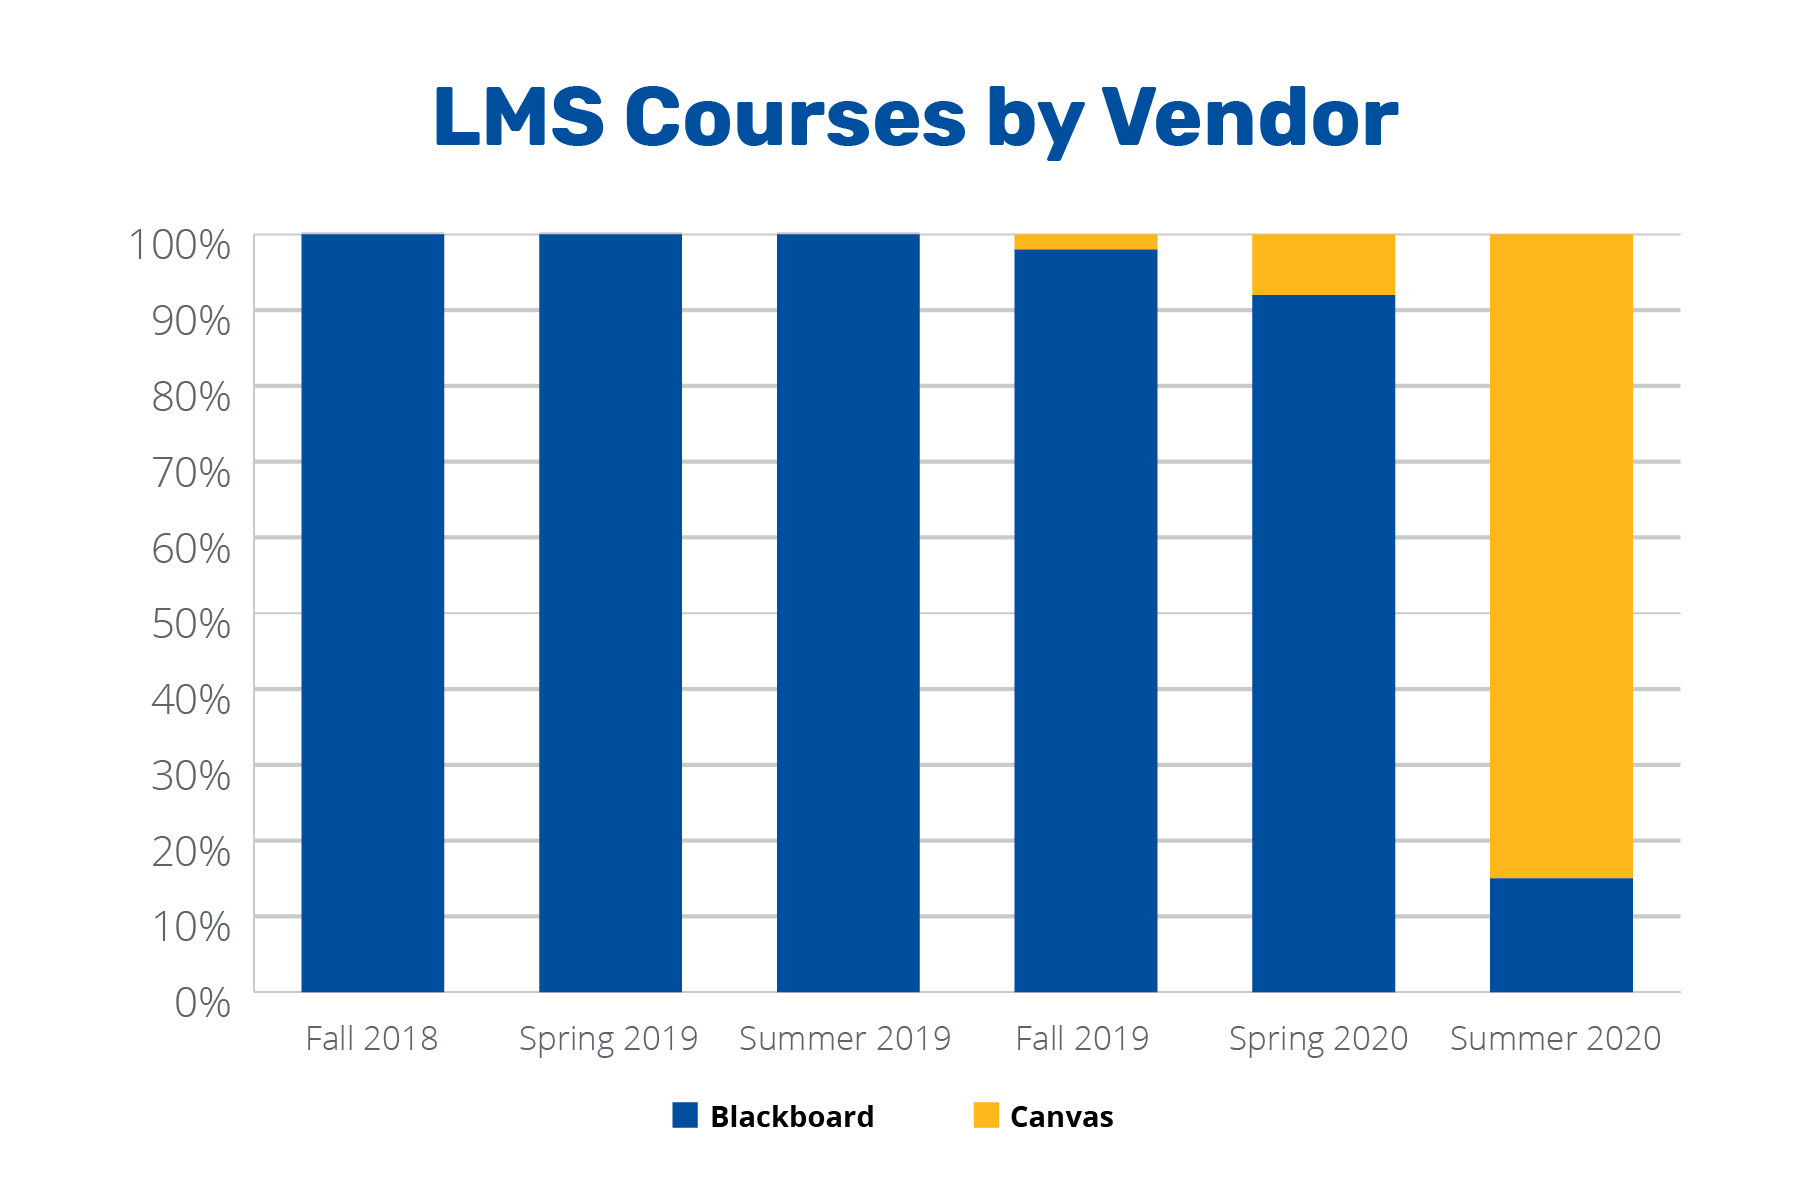 Annual Report 2020 - LMS Courses by Vendor